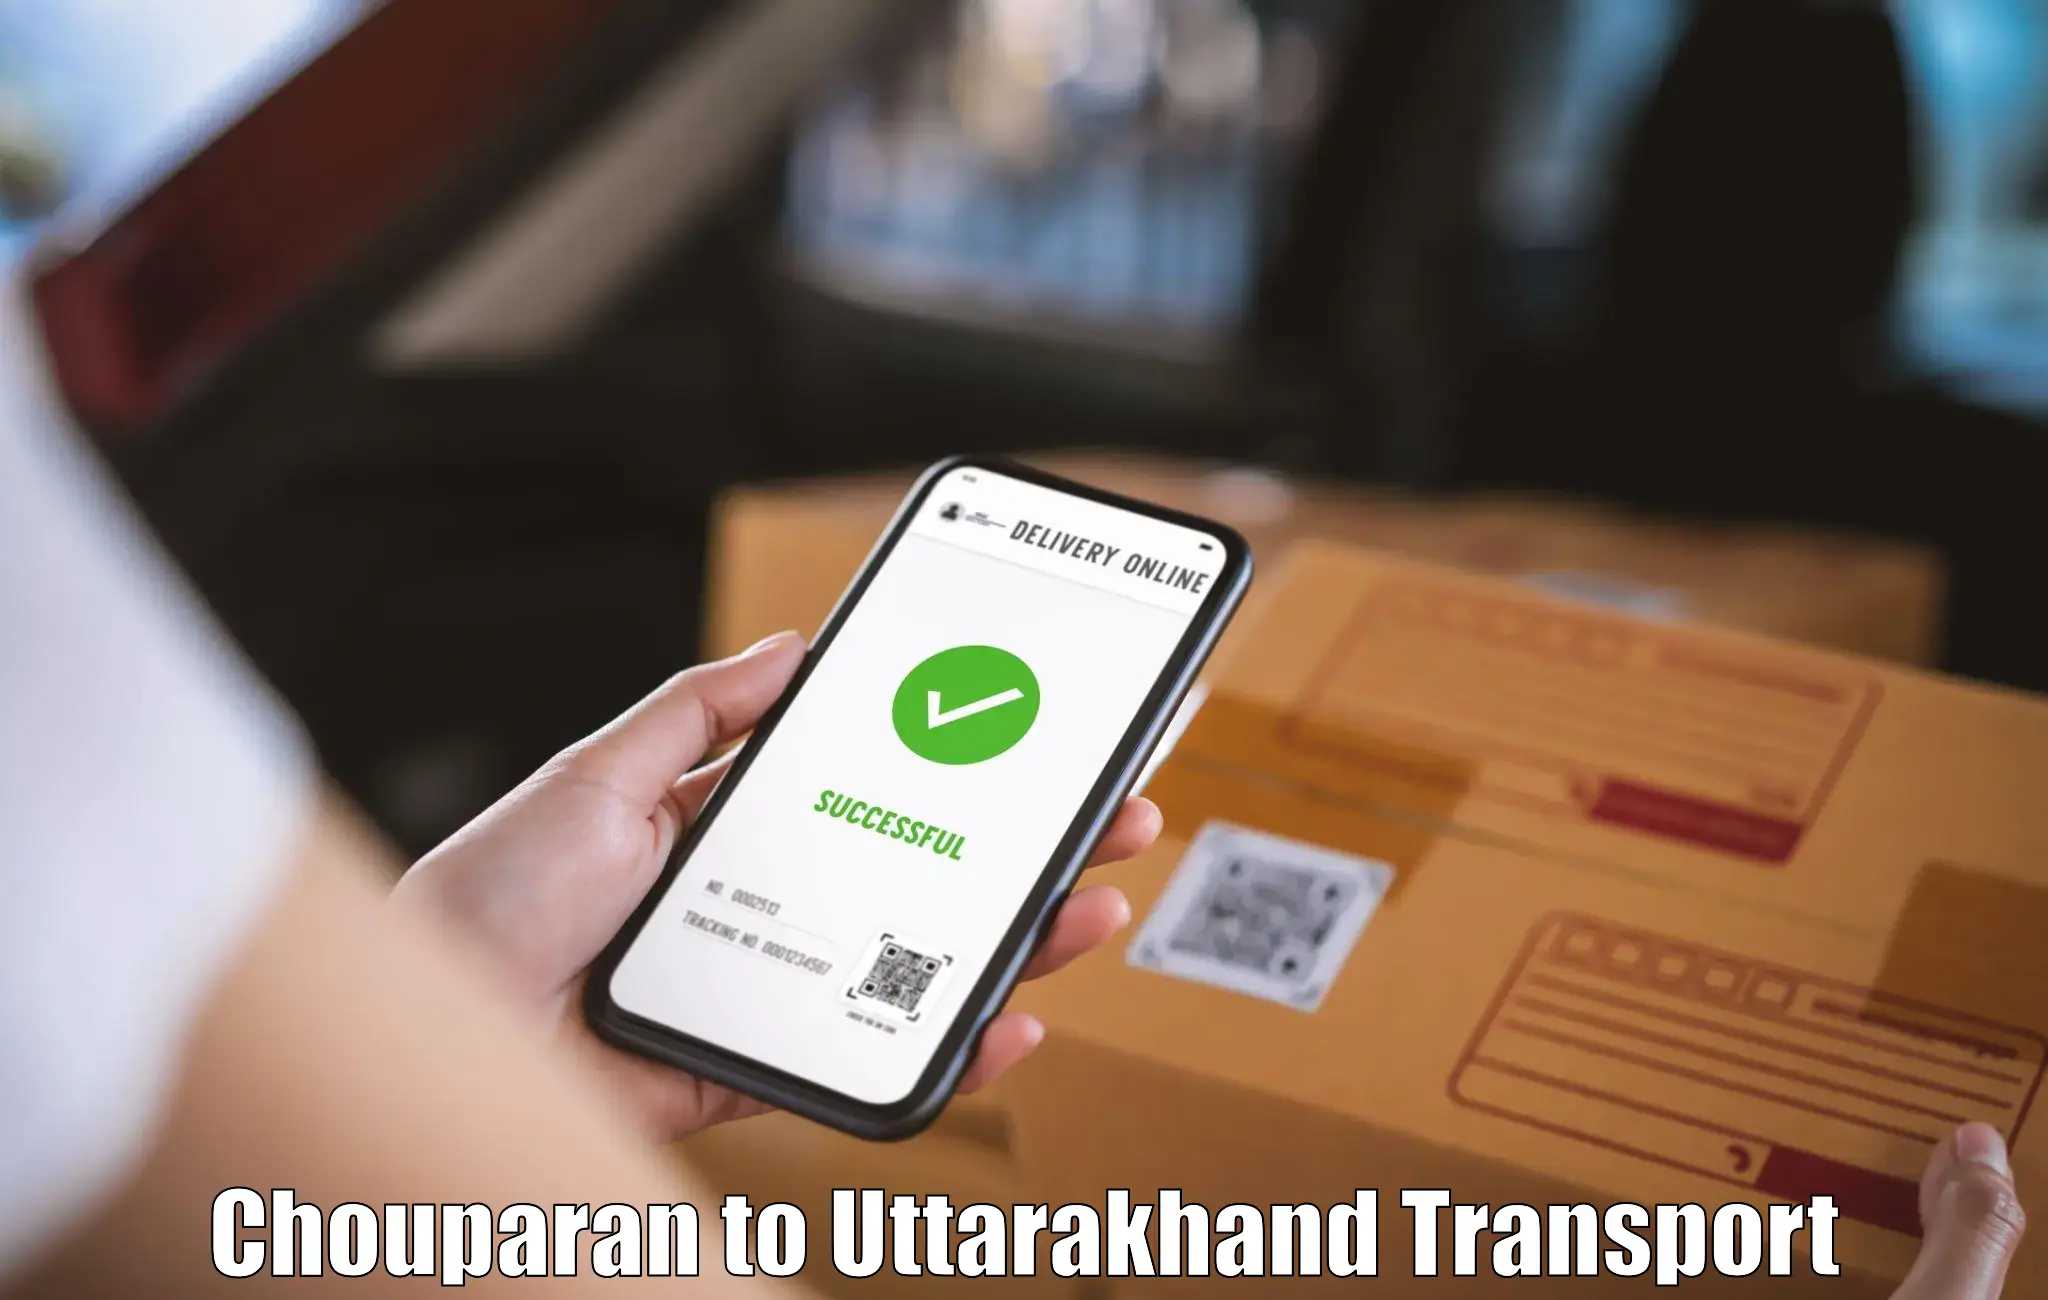 Parcel transport services Chouparan to Paithani